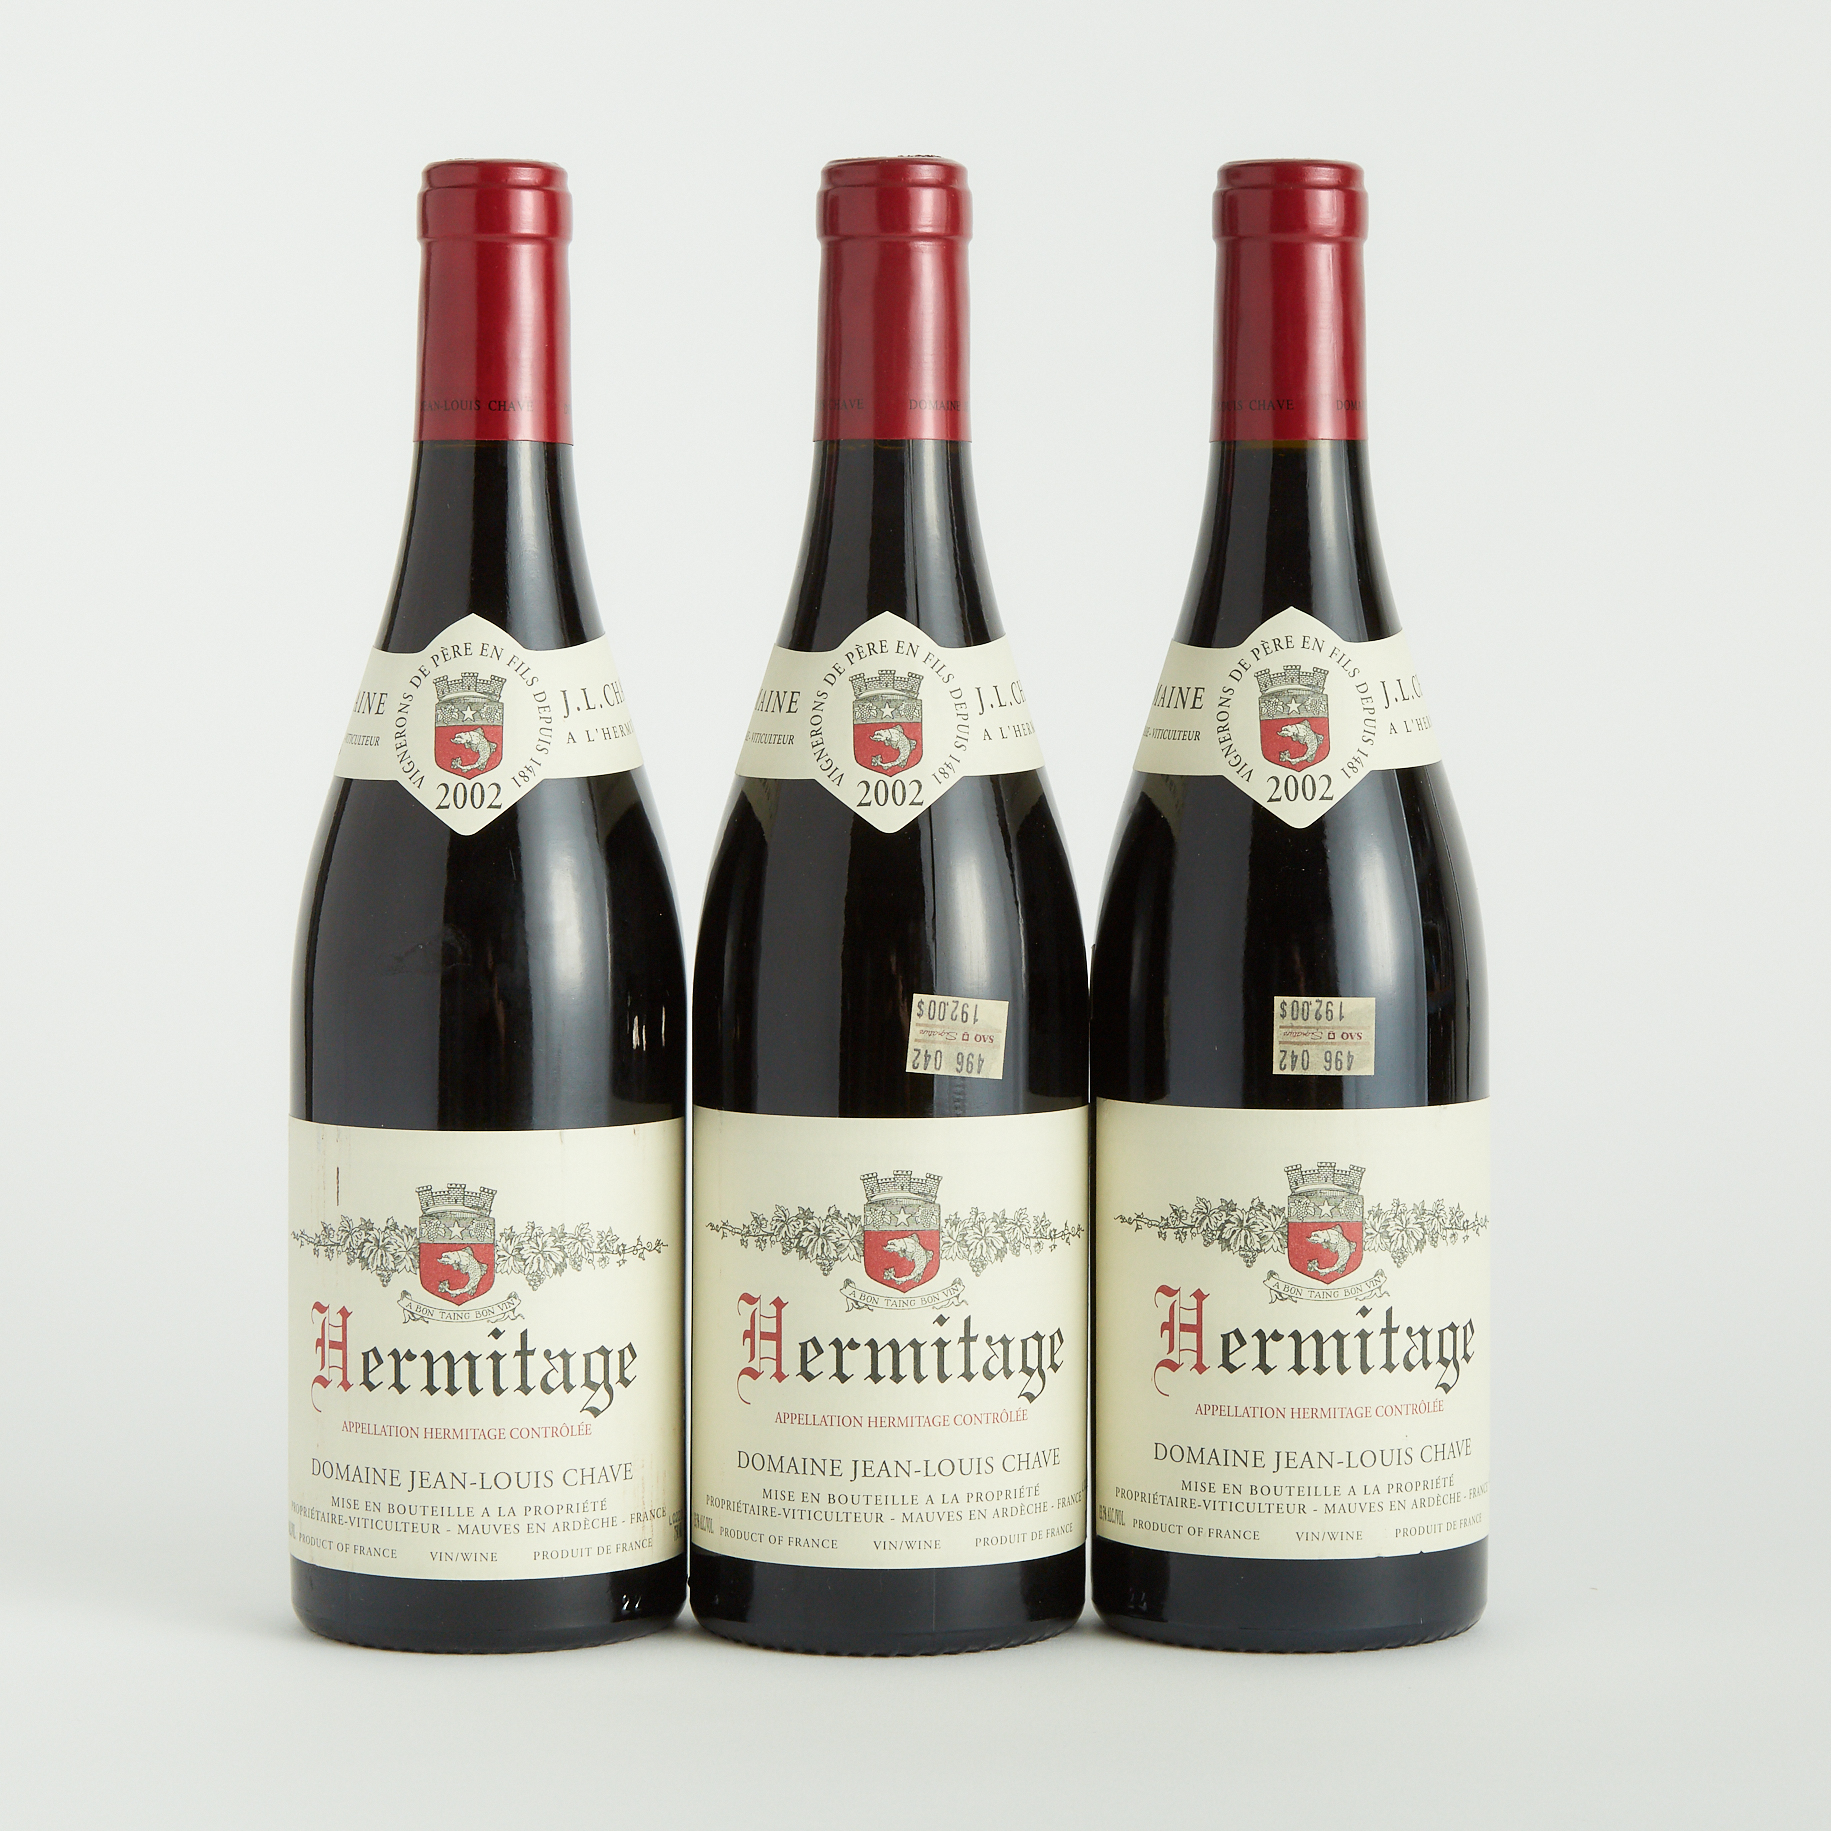 DOMAINE JEAN-LOUIS CHAVE HERMITAGE 2002 (3)